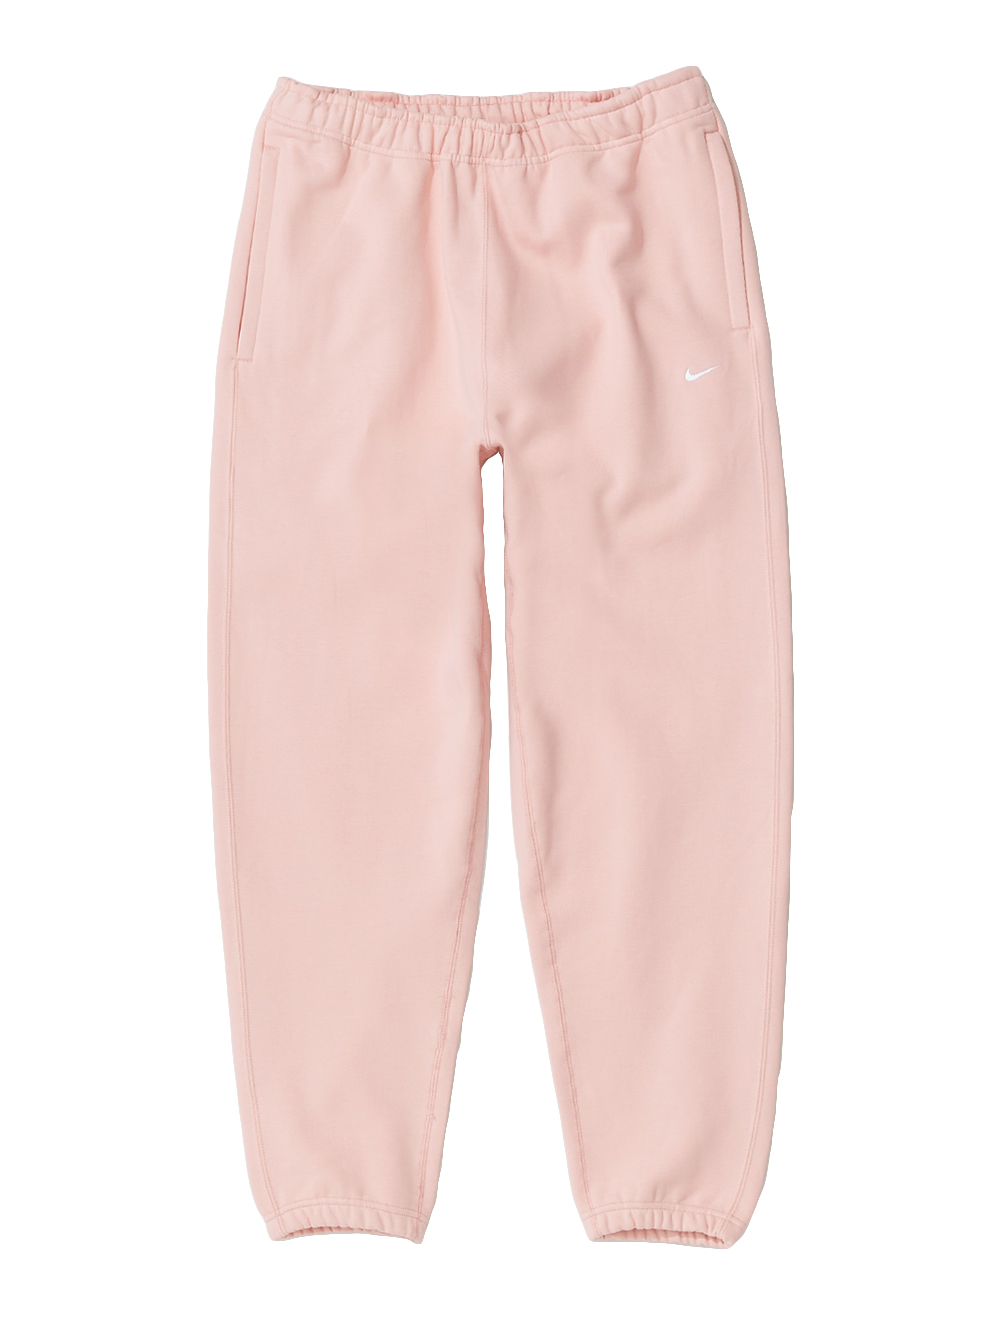 Nike Solo Swoosh Fleece Trousers Bleached Coral/White